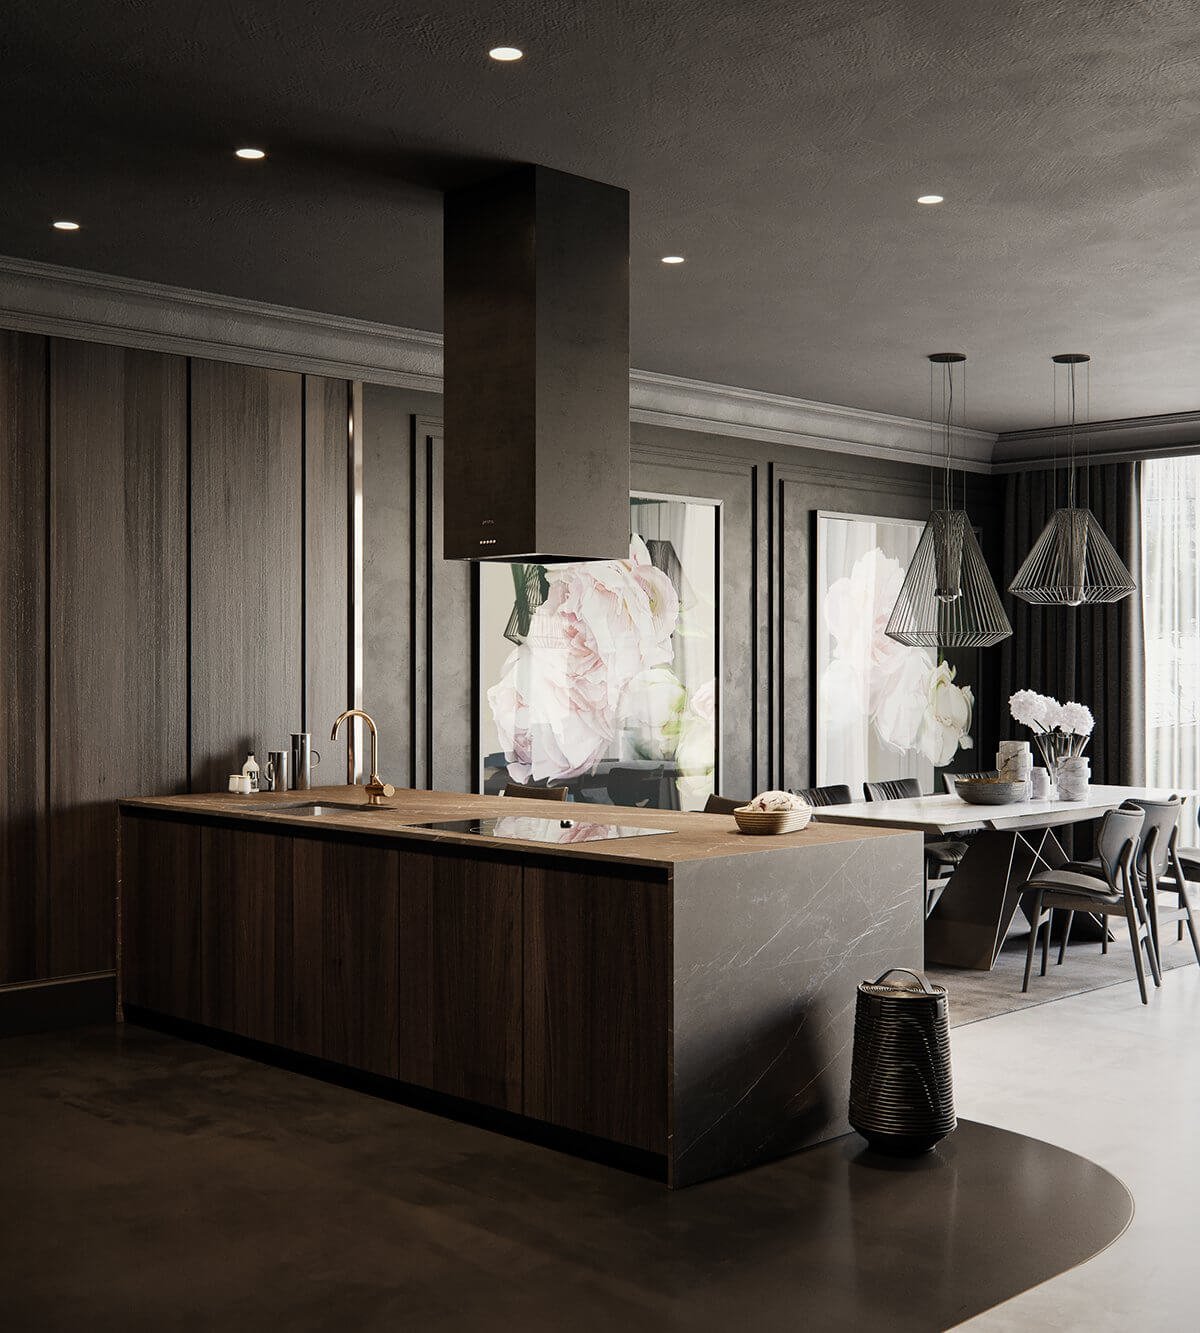 Moscow apartment kitchen dining room - cgi visualization